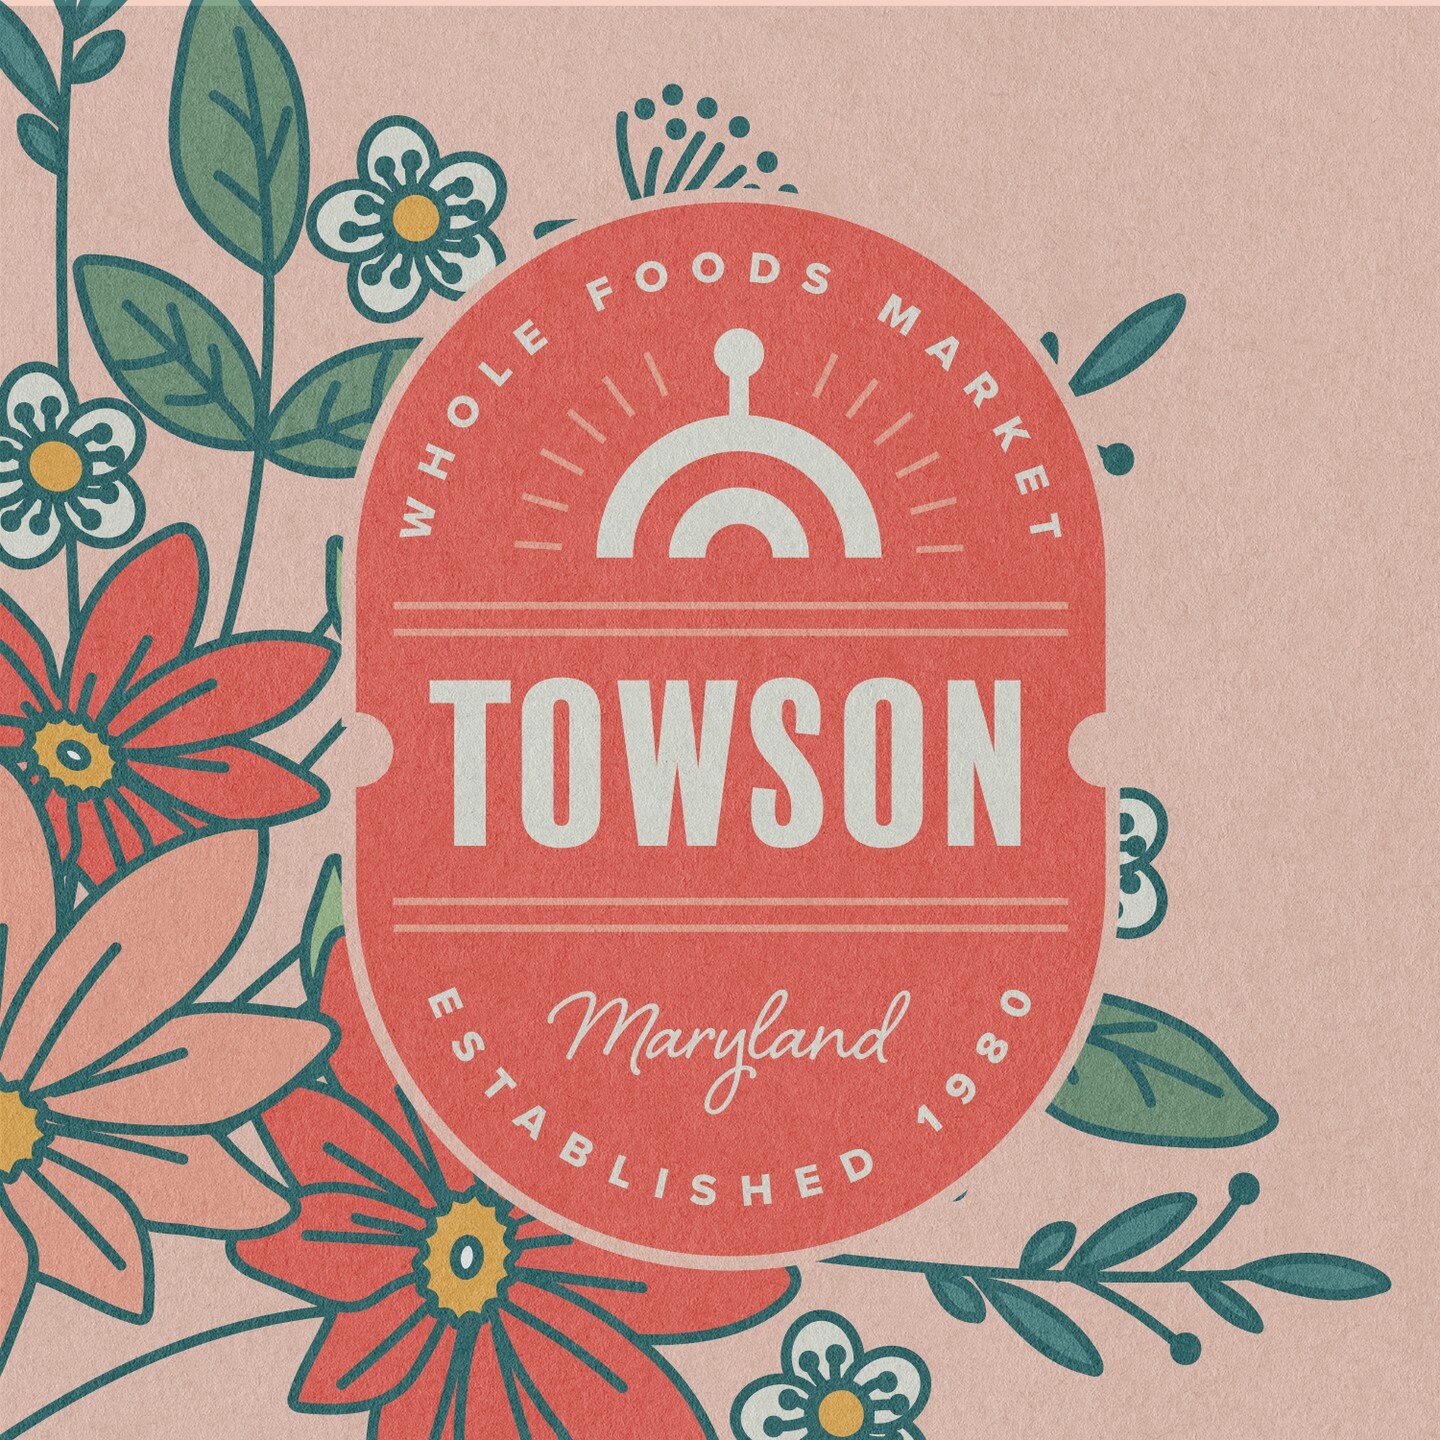 Getting major springtime vibes from these illustrations we developed for @wholefoods Towson.